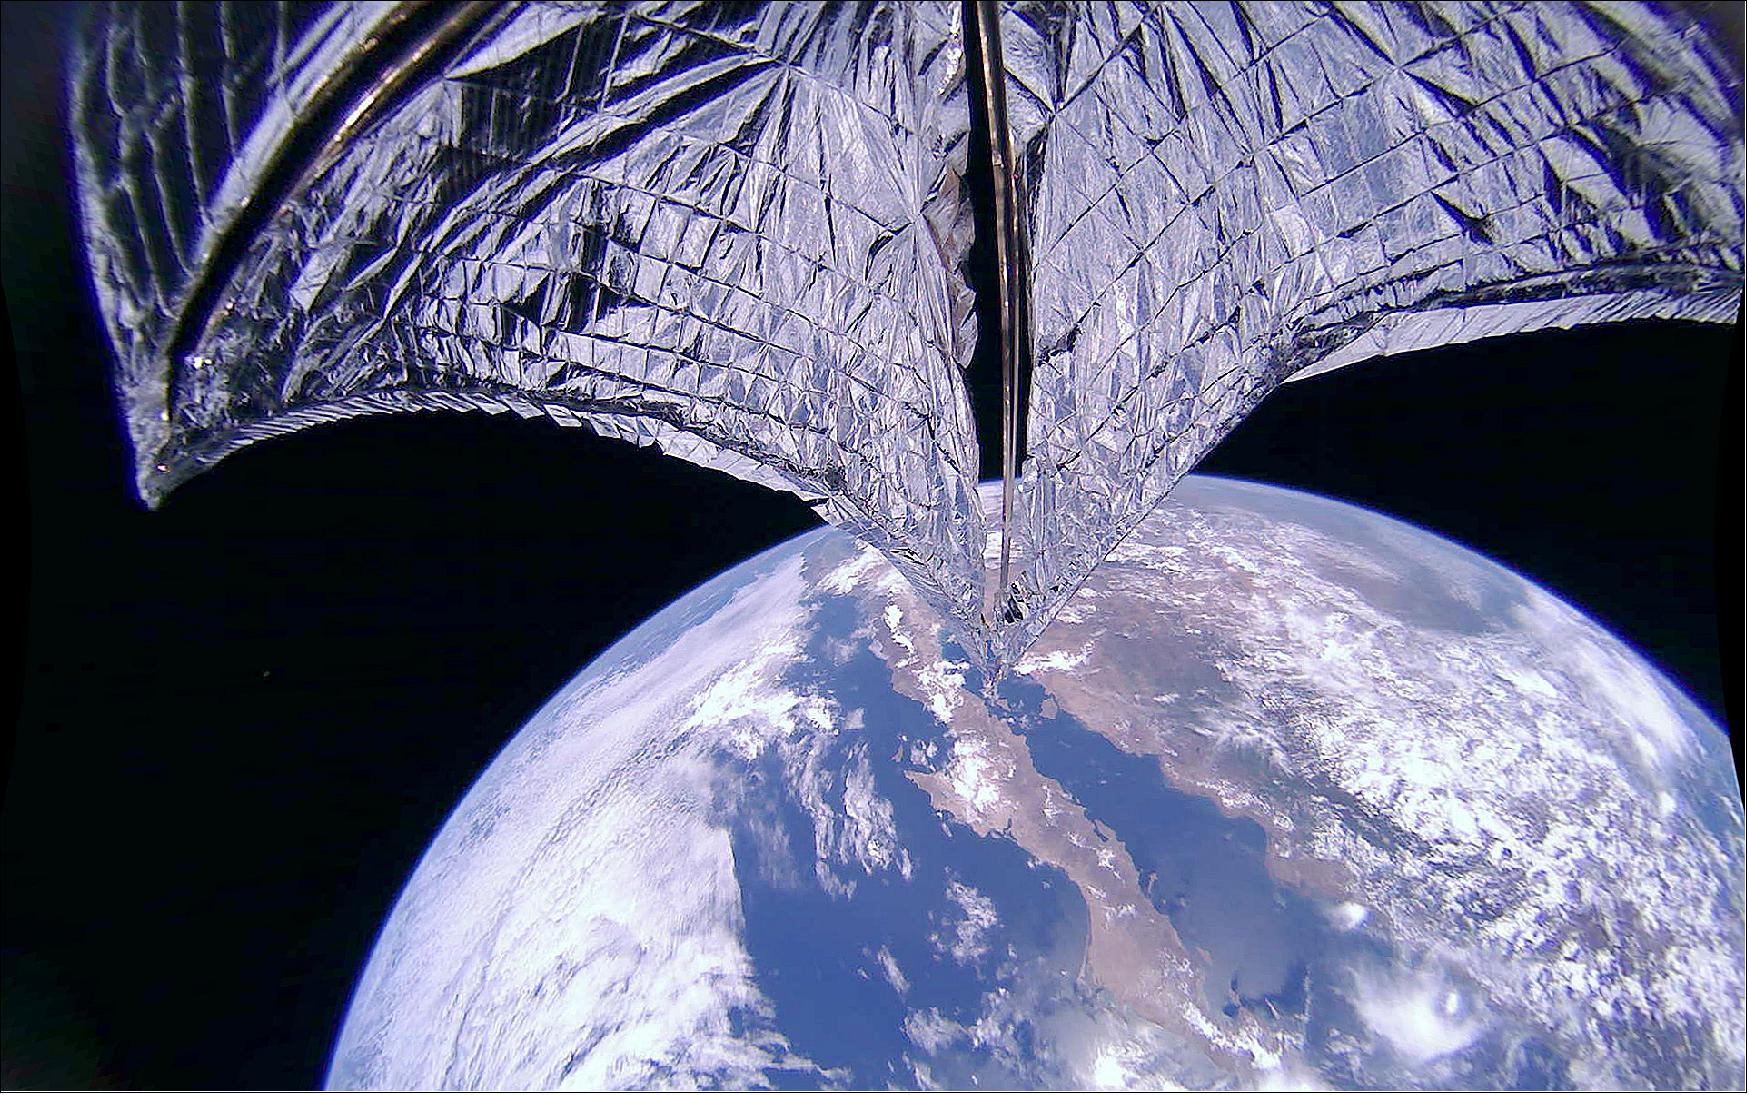 Figure 14: This image was taken during the LightSail-2 sail deployment sequence on 23 July 2019 at 11:48 PDT (18:48 UTC). Baja California and Mexico are visible in the background. LightSail-2's dual 185º fisheye camera lenses can each capture more than half of the sail. This image has been de-distorted and color corrected (image credit: The Planetary Society)